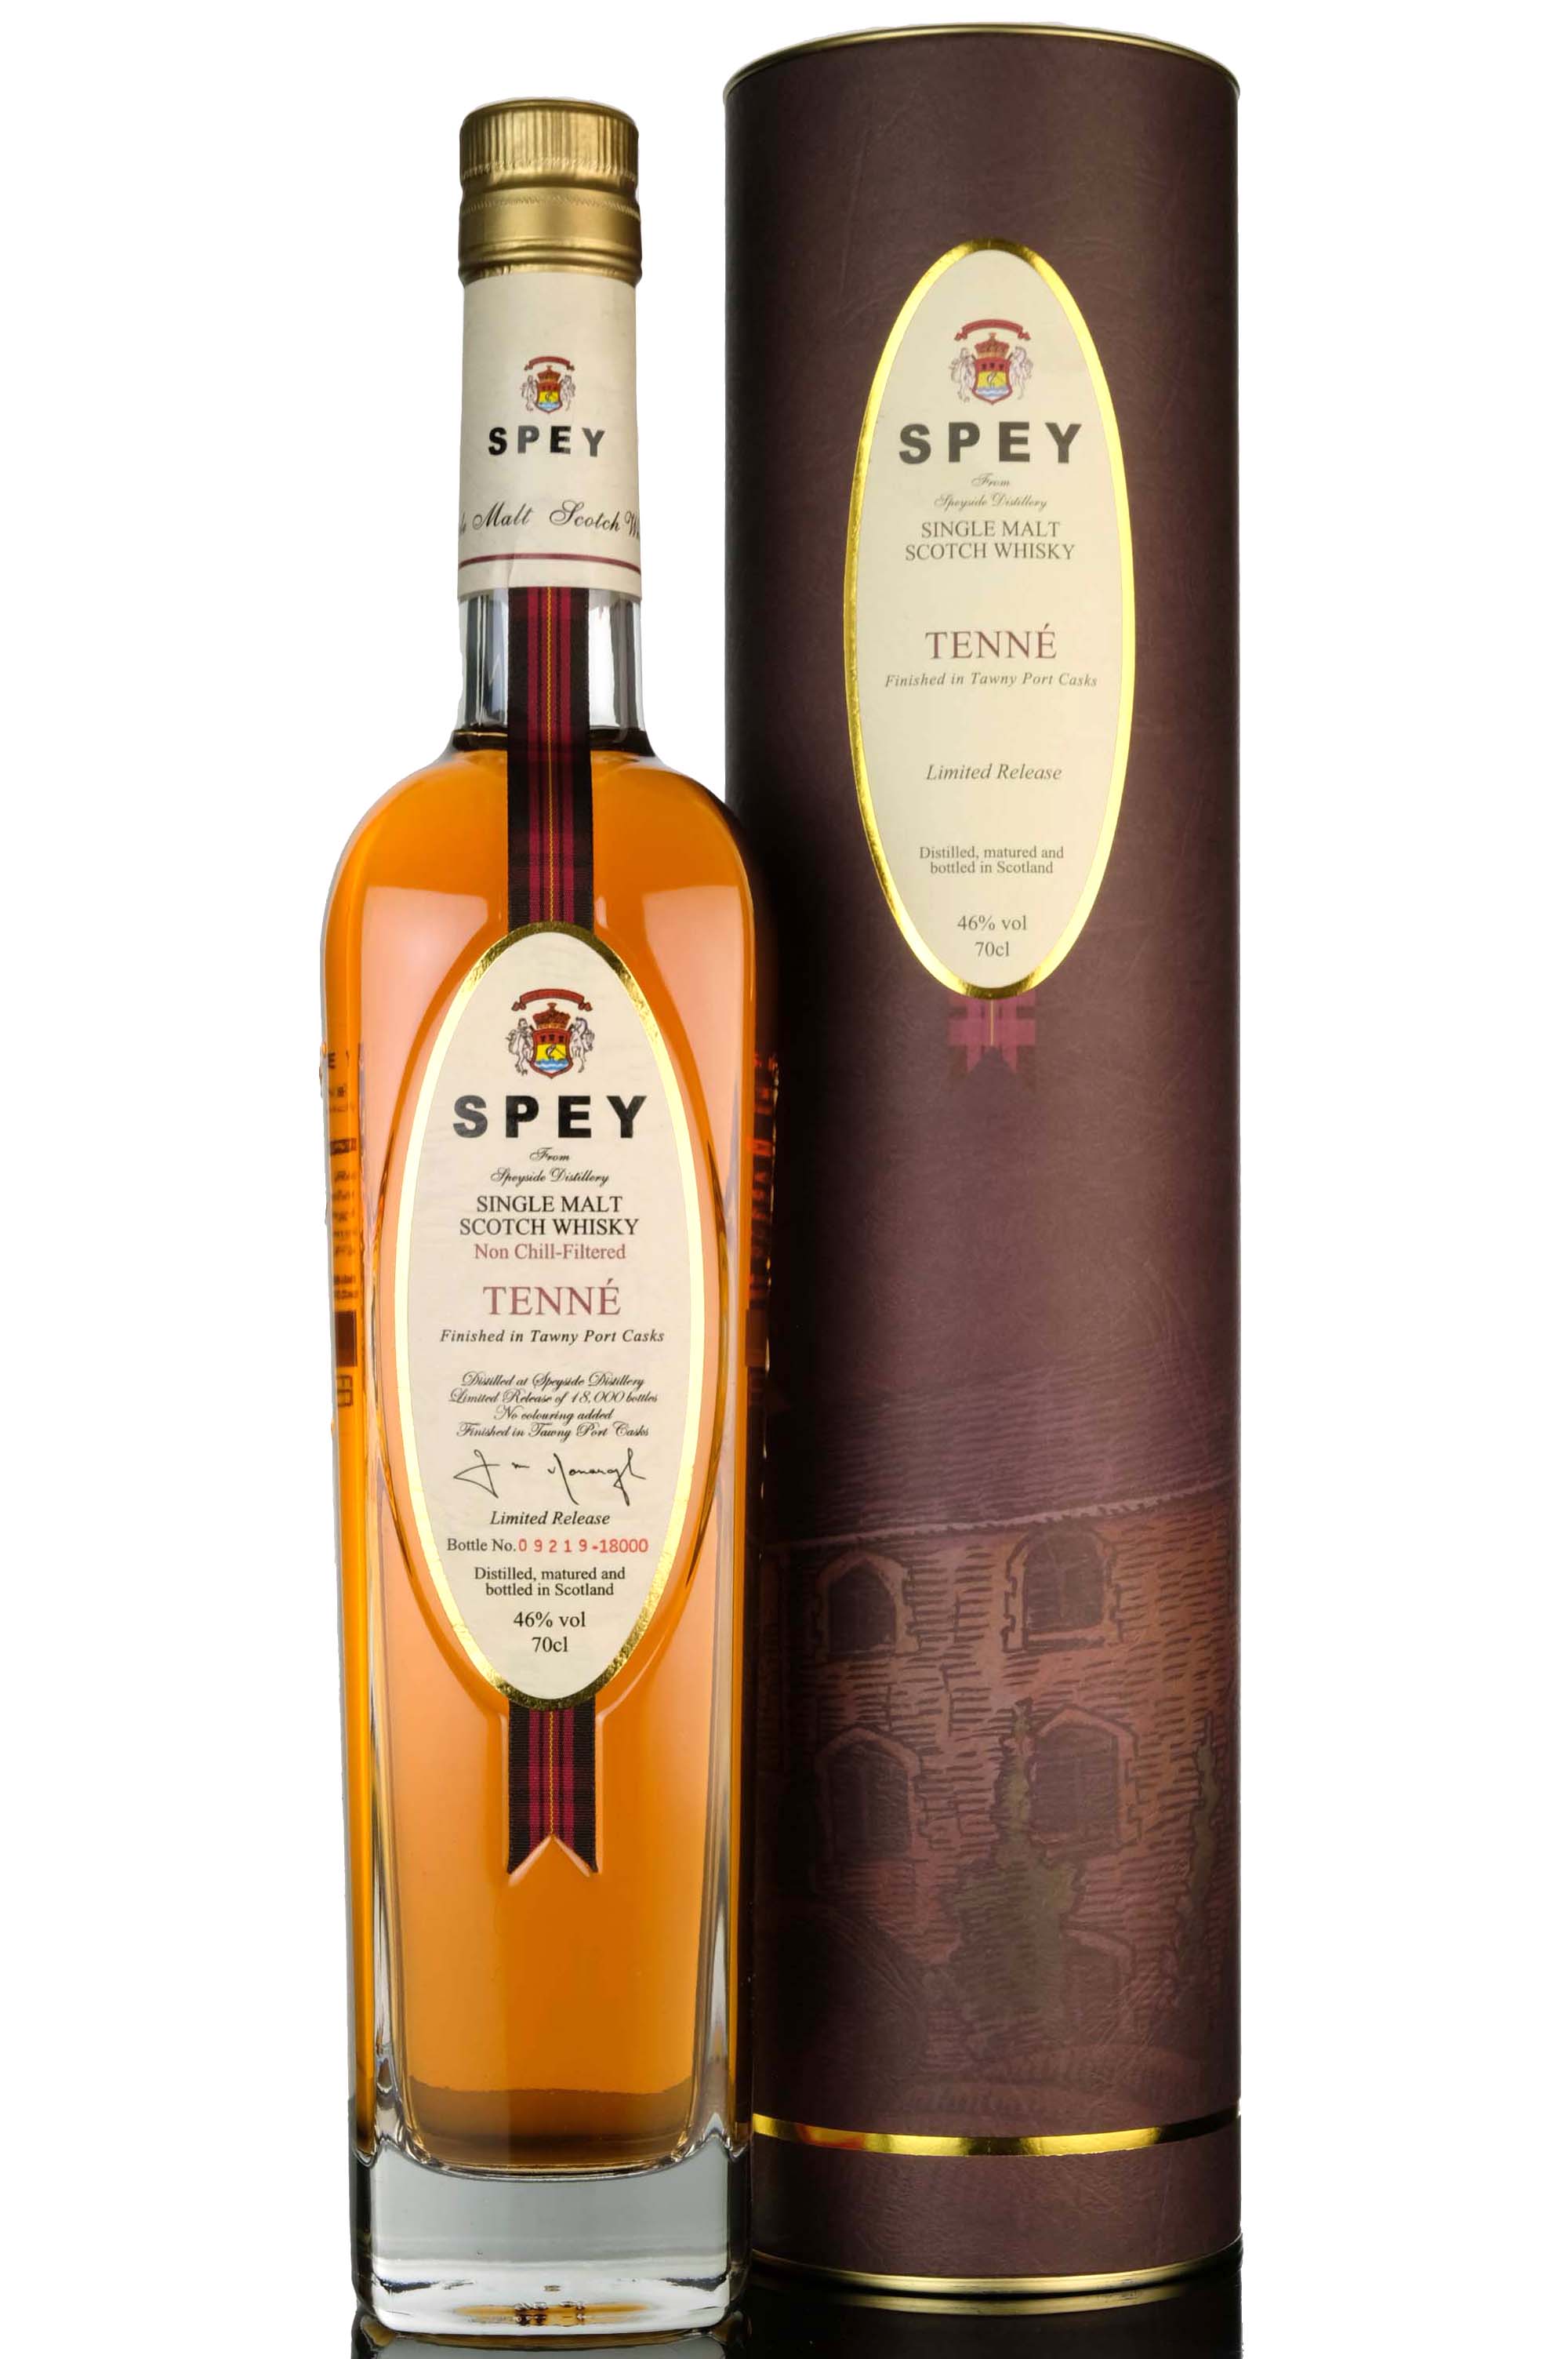 Spey Tenne - Limited Release